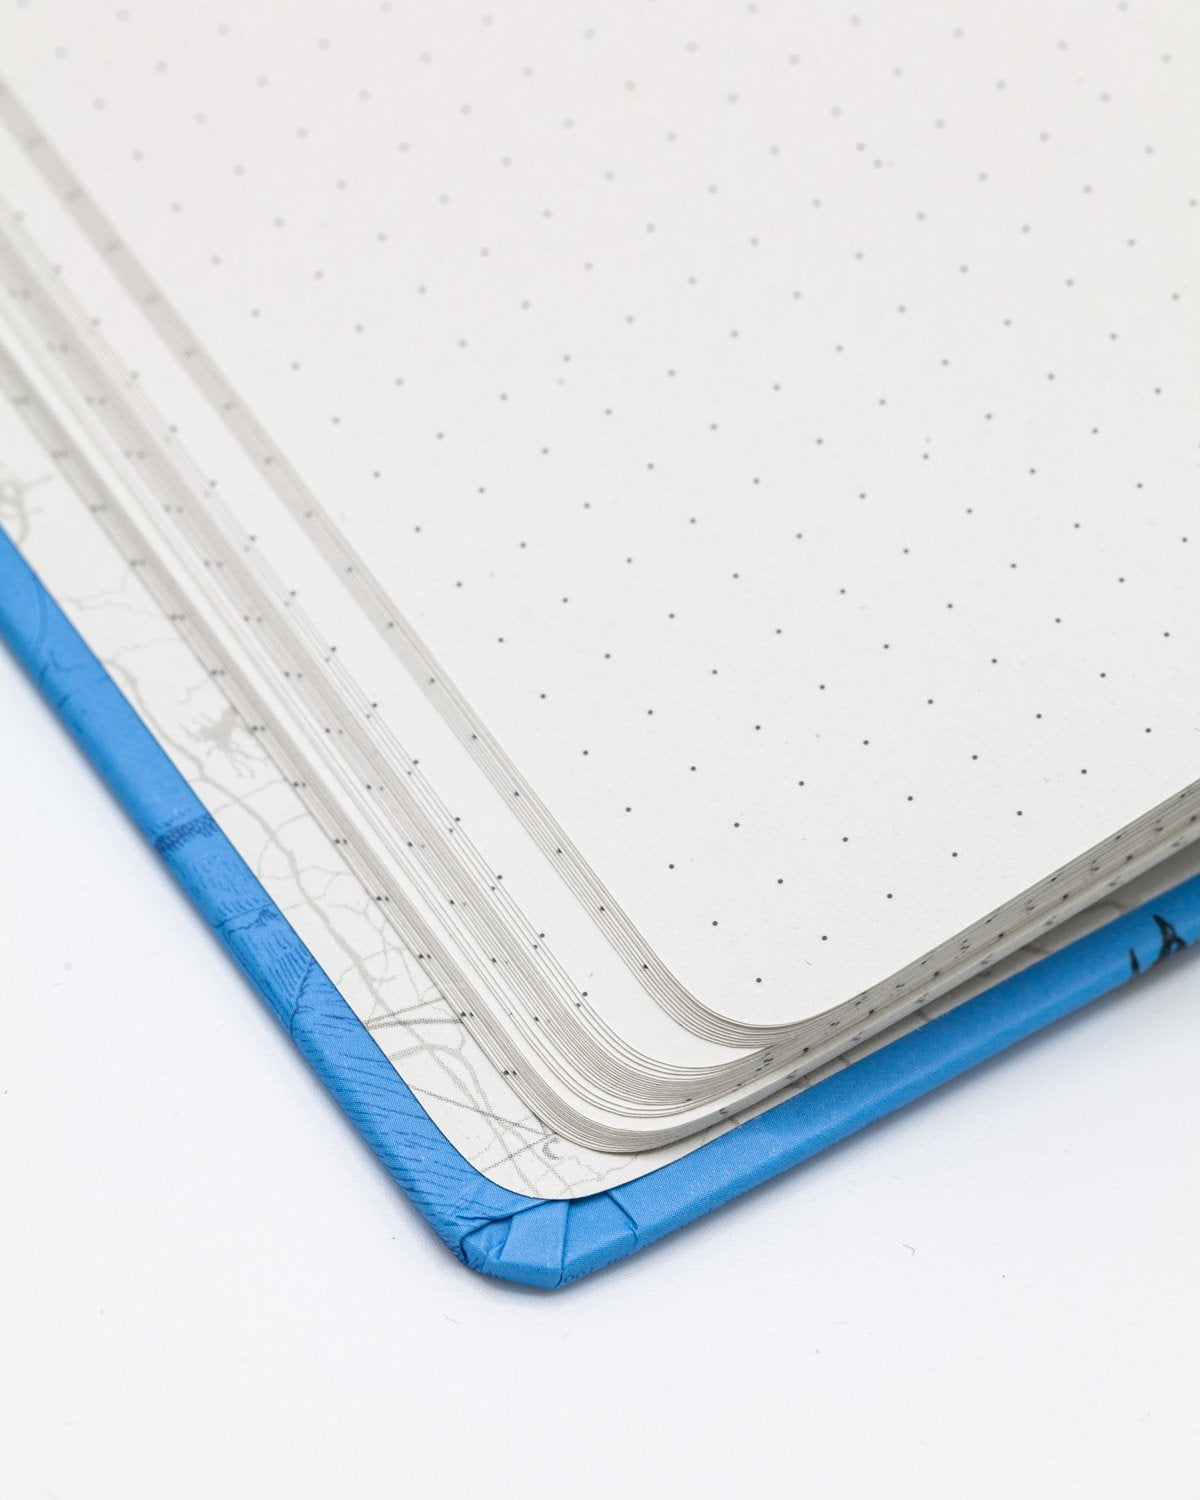 Dot grid recycled pages of birds hardcover journal by Cognitive Surplus